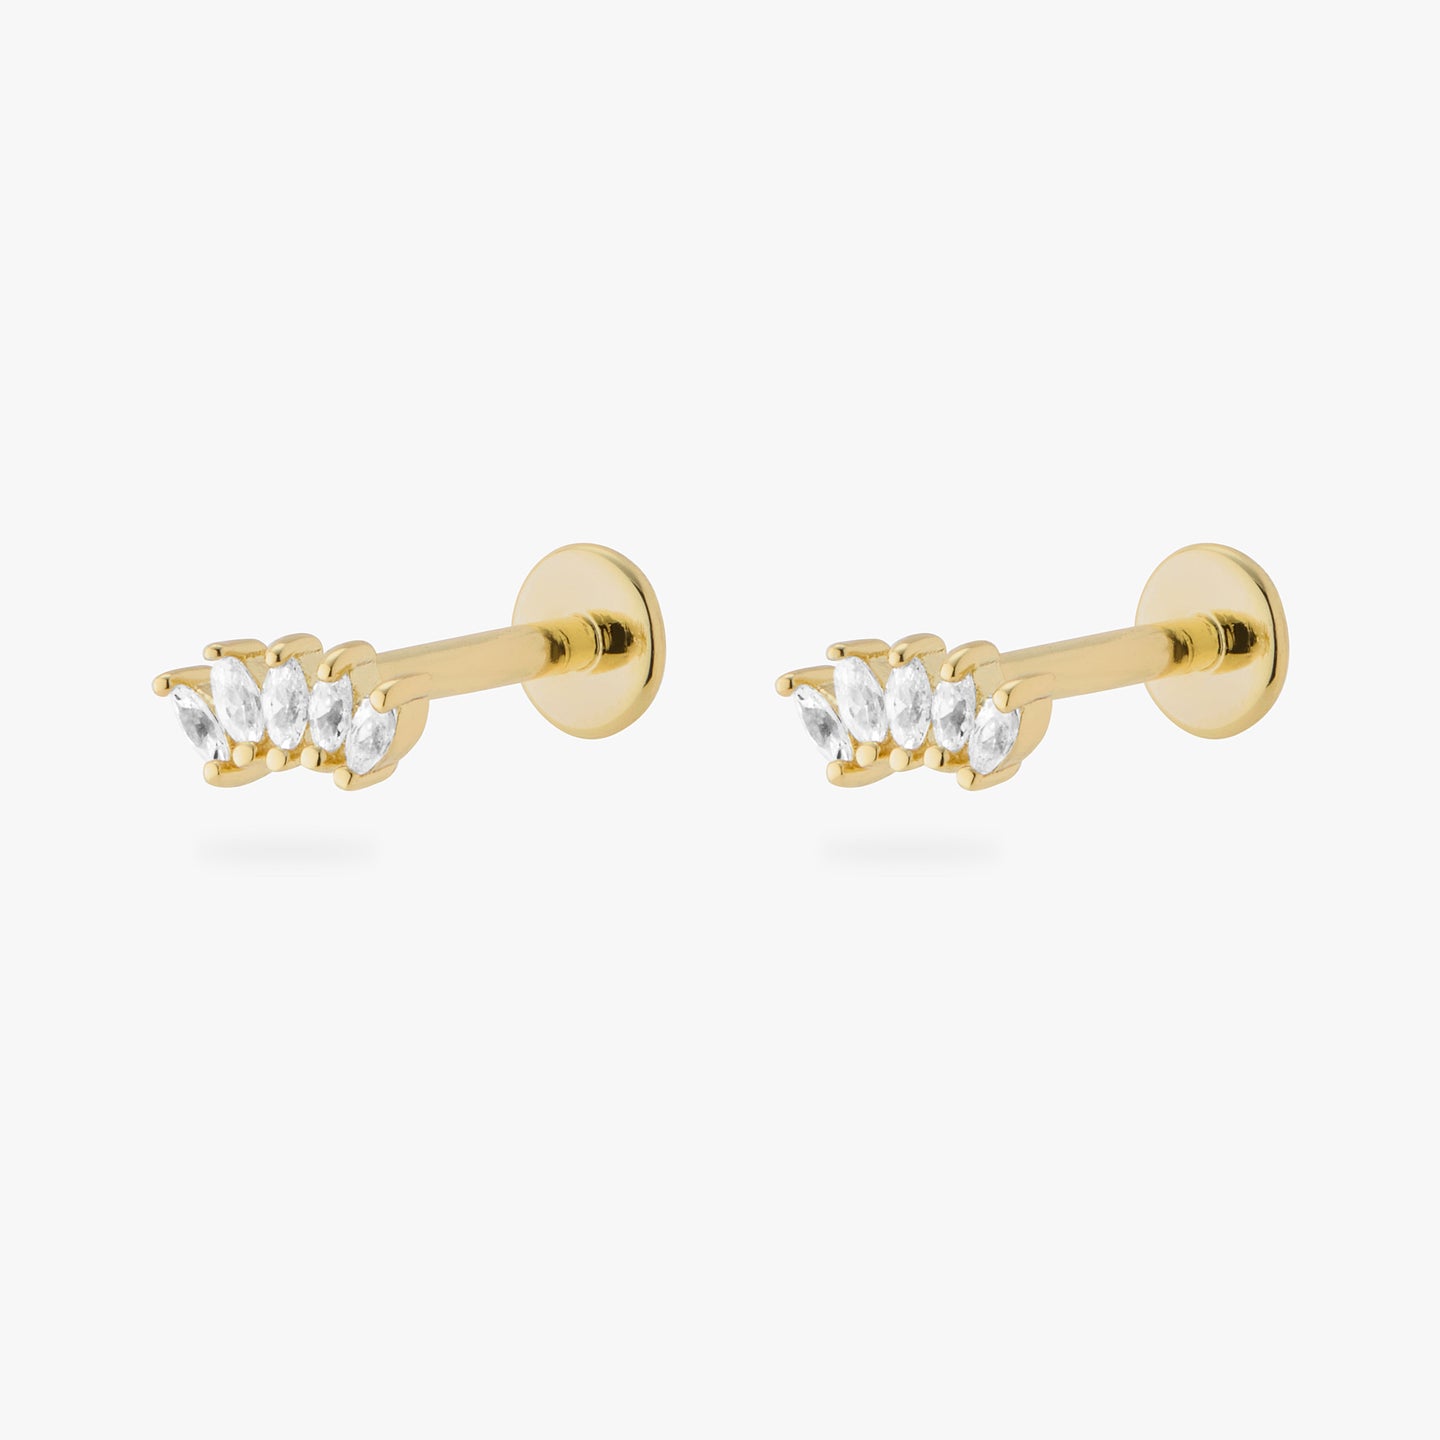 a pair of gold flatback studs with a small crown-shape of clear marquise studs [pair] color:null|gold/clear|6mm / gold/clear|8mm / gold/clear|10mm / gold/clear|6mm / gold|8mm / gold|10mm / gold